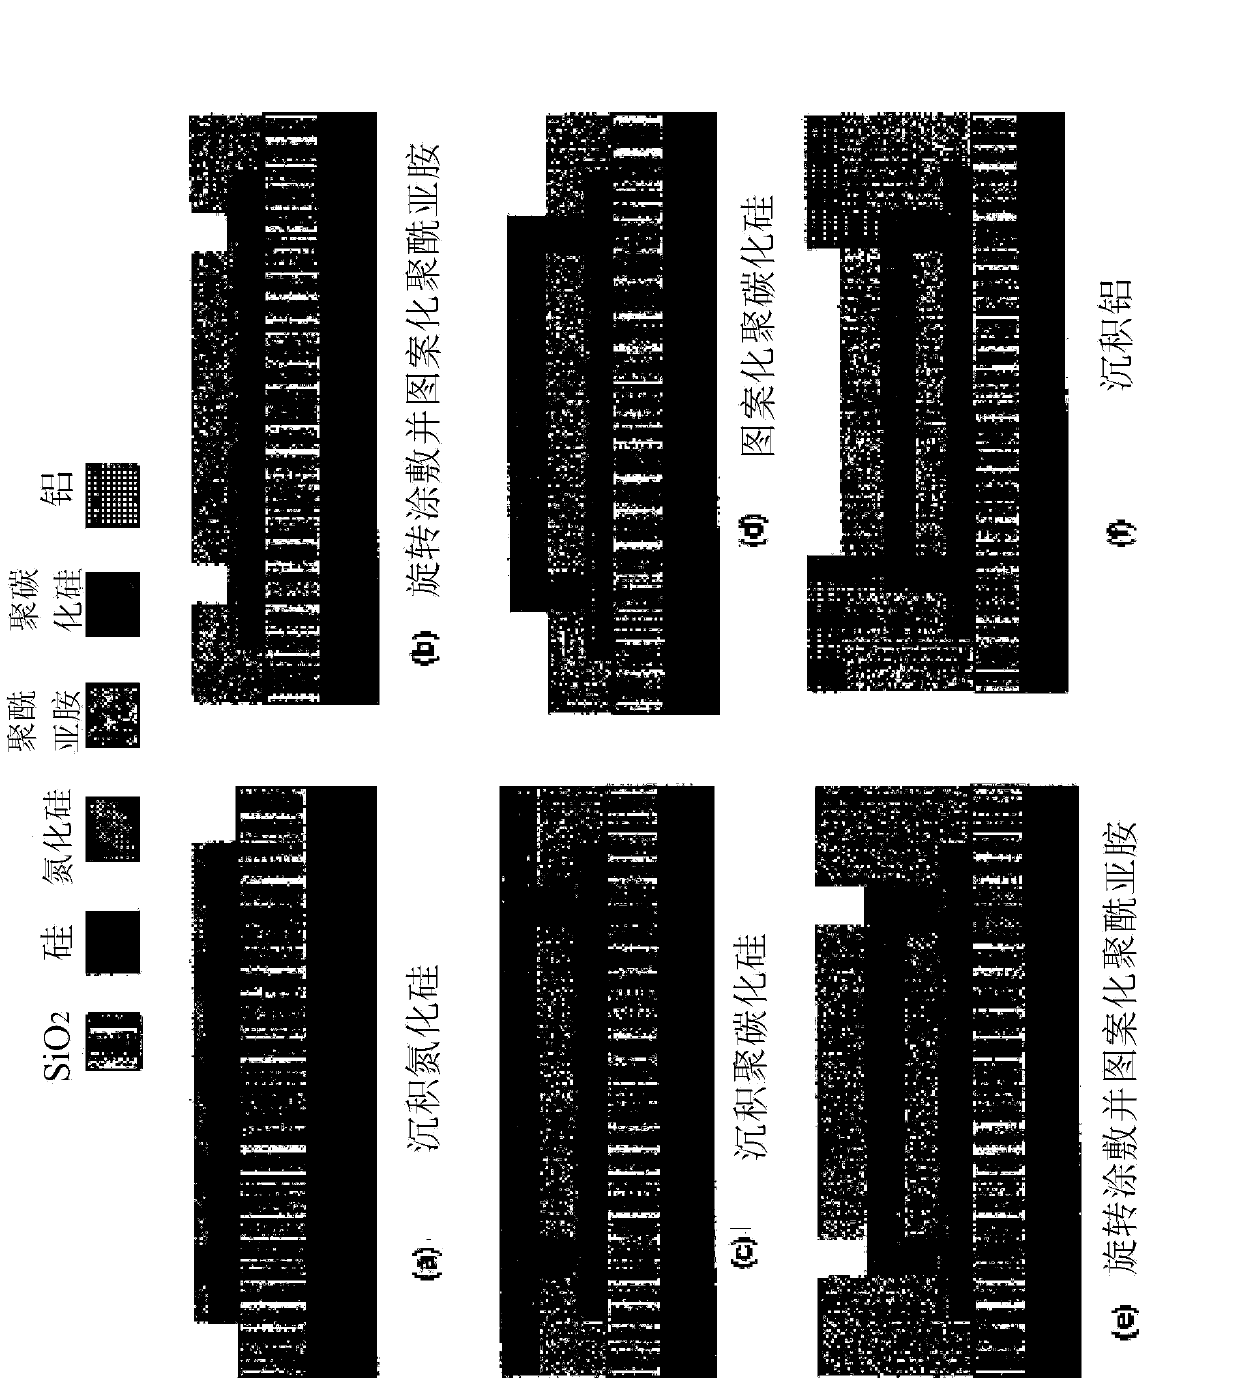 A fully integrated complementary metal oxide semiconductor (CMOS) fourier transform infrared (FTIR) spectrometer and raman spectrometer and method thereof